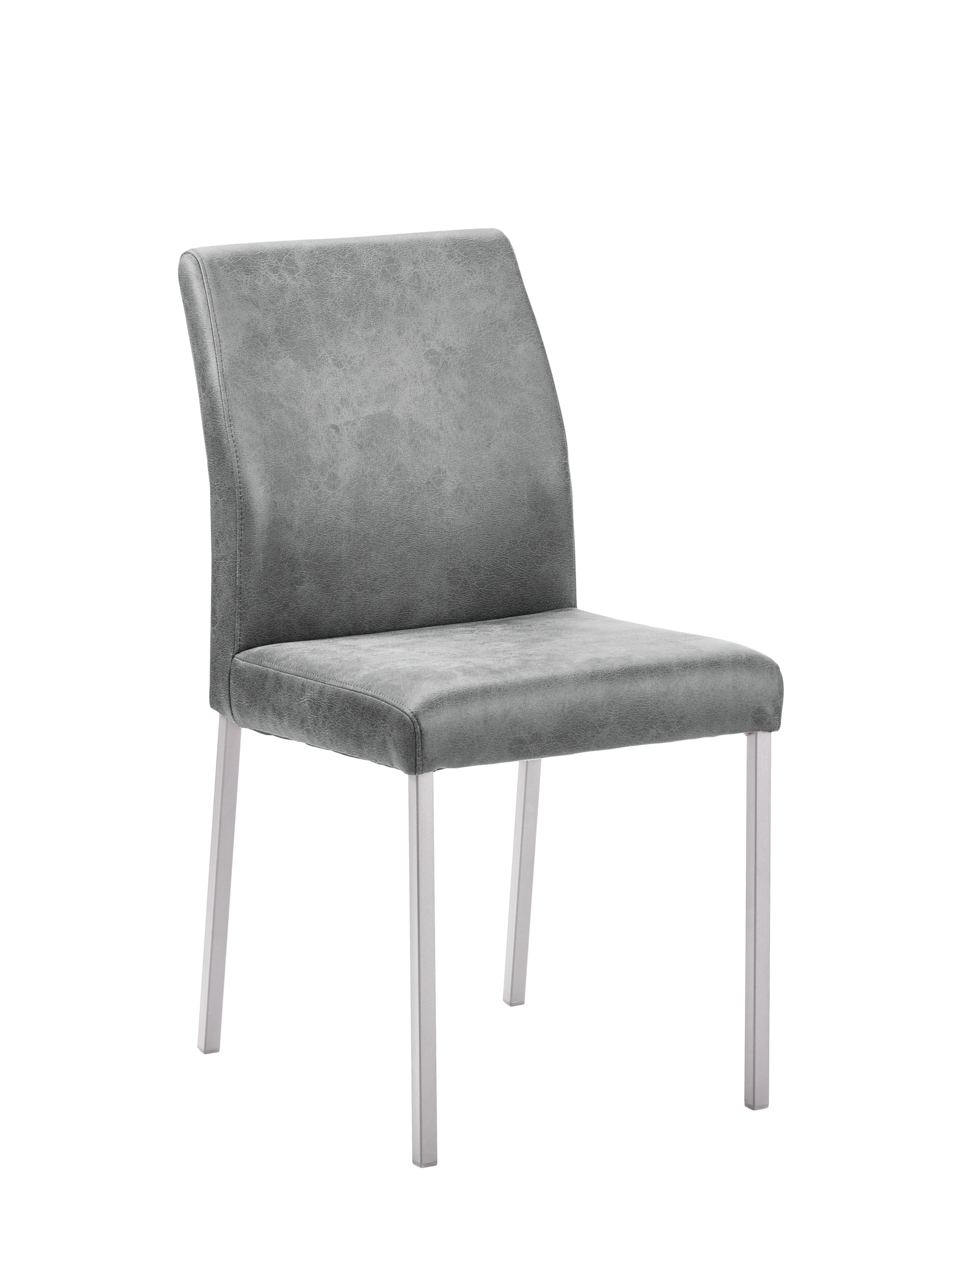 Barile 1WS, Chair, frame stainless steel, cover light grey (34353)